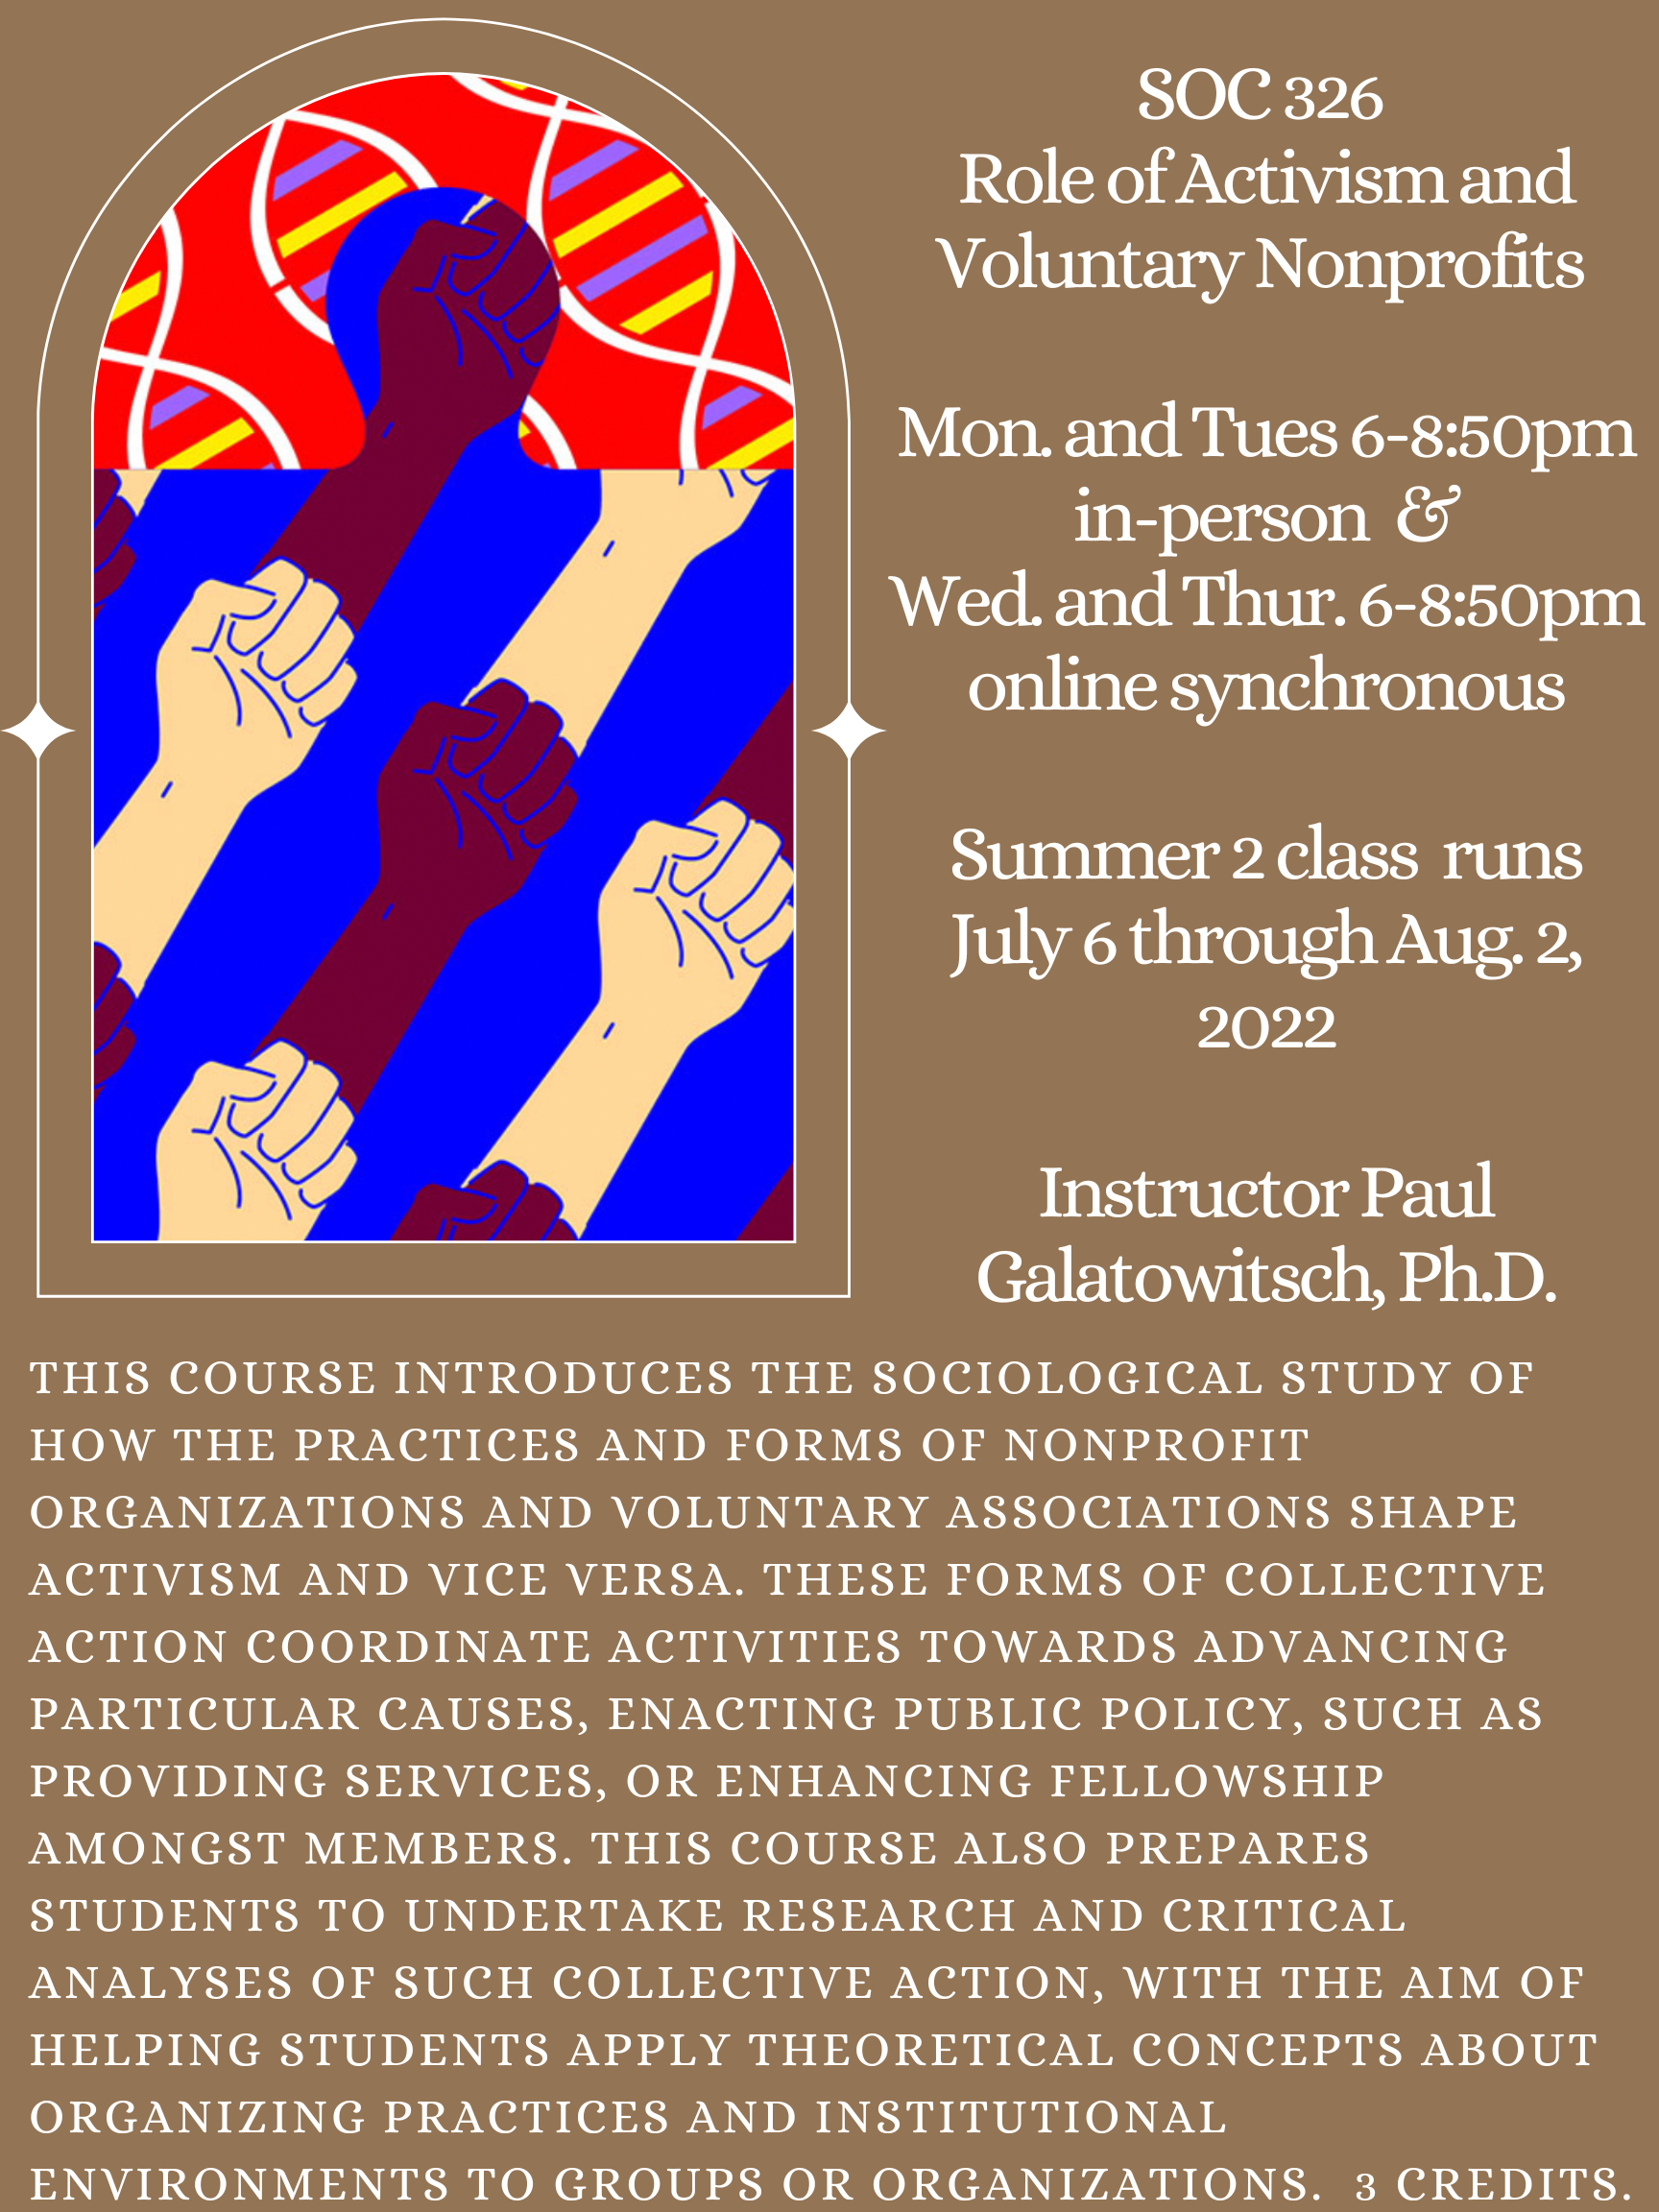 SOC 326 Role of Activism and Voluntary Nonprofits